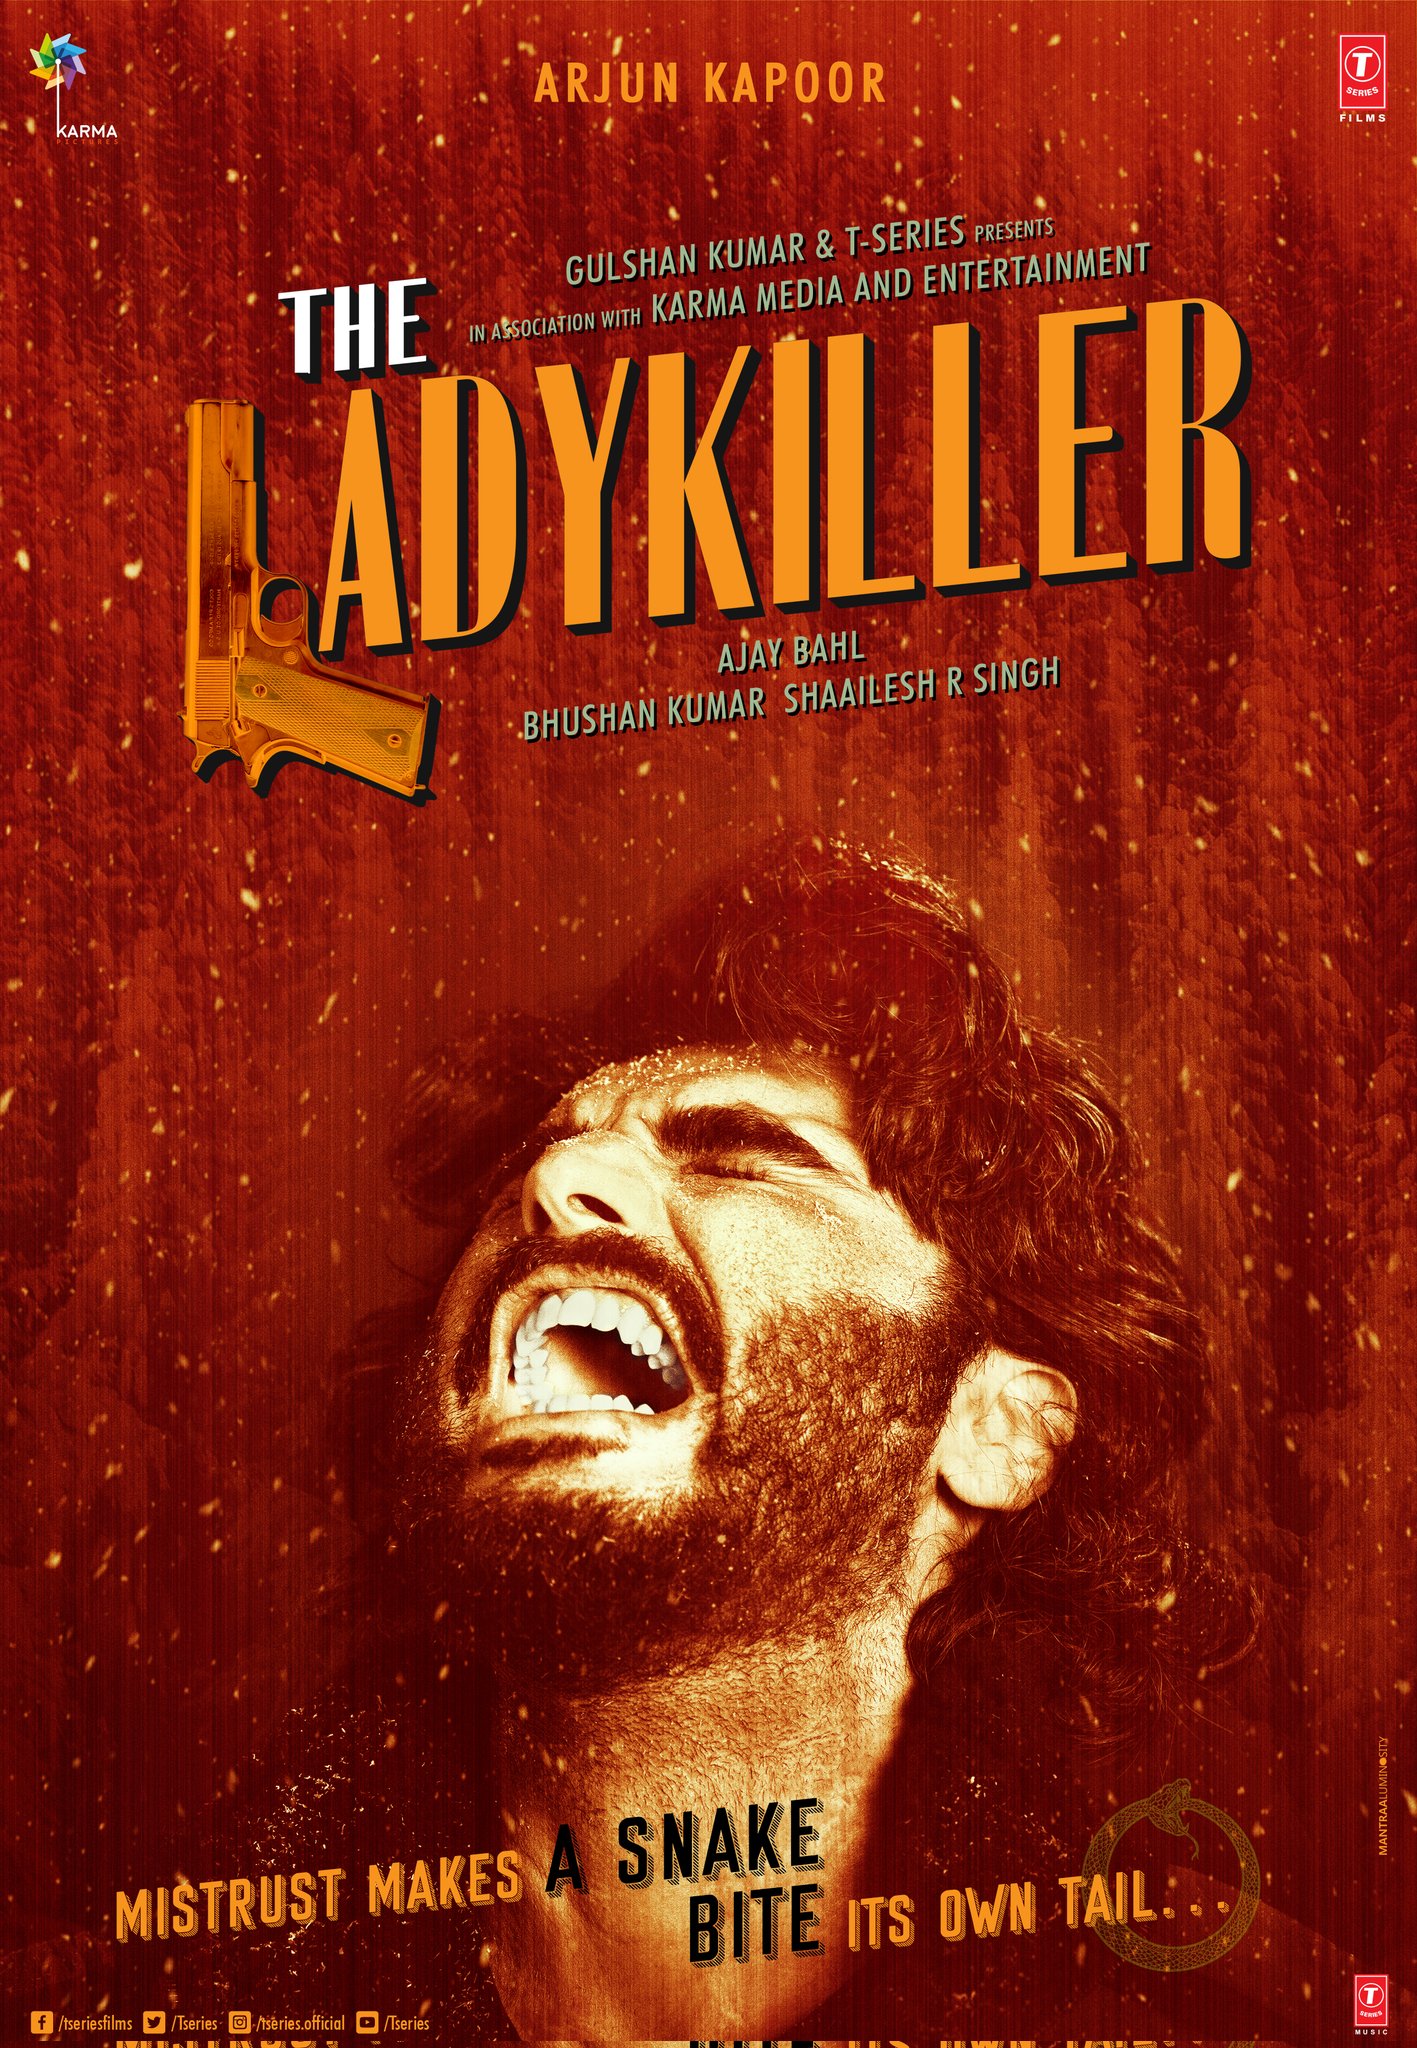 Arjun Kapoor in his upcoming thriller ‘The Lady Killer